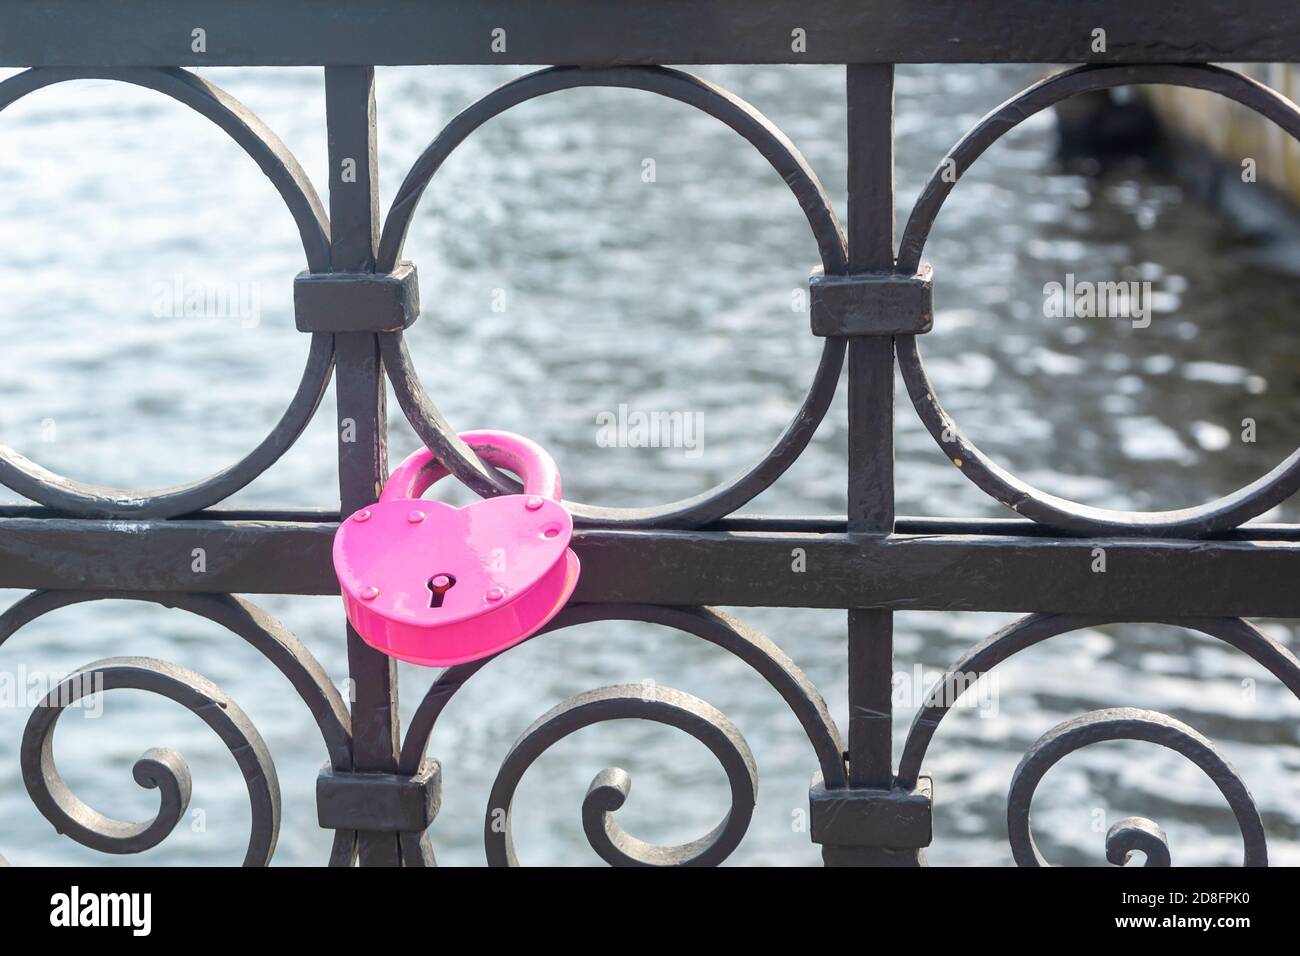 Pink padlock in the shape of heart closed by newlyweds on their wedding day. Symbol of eternal love and fidelity on forged metal fence of bridge. Stock Photo